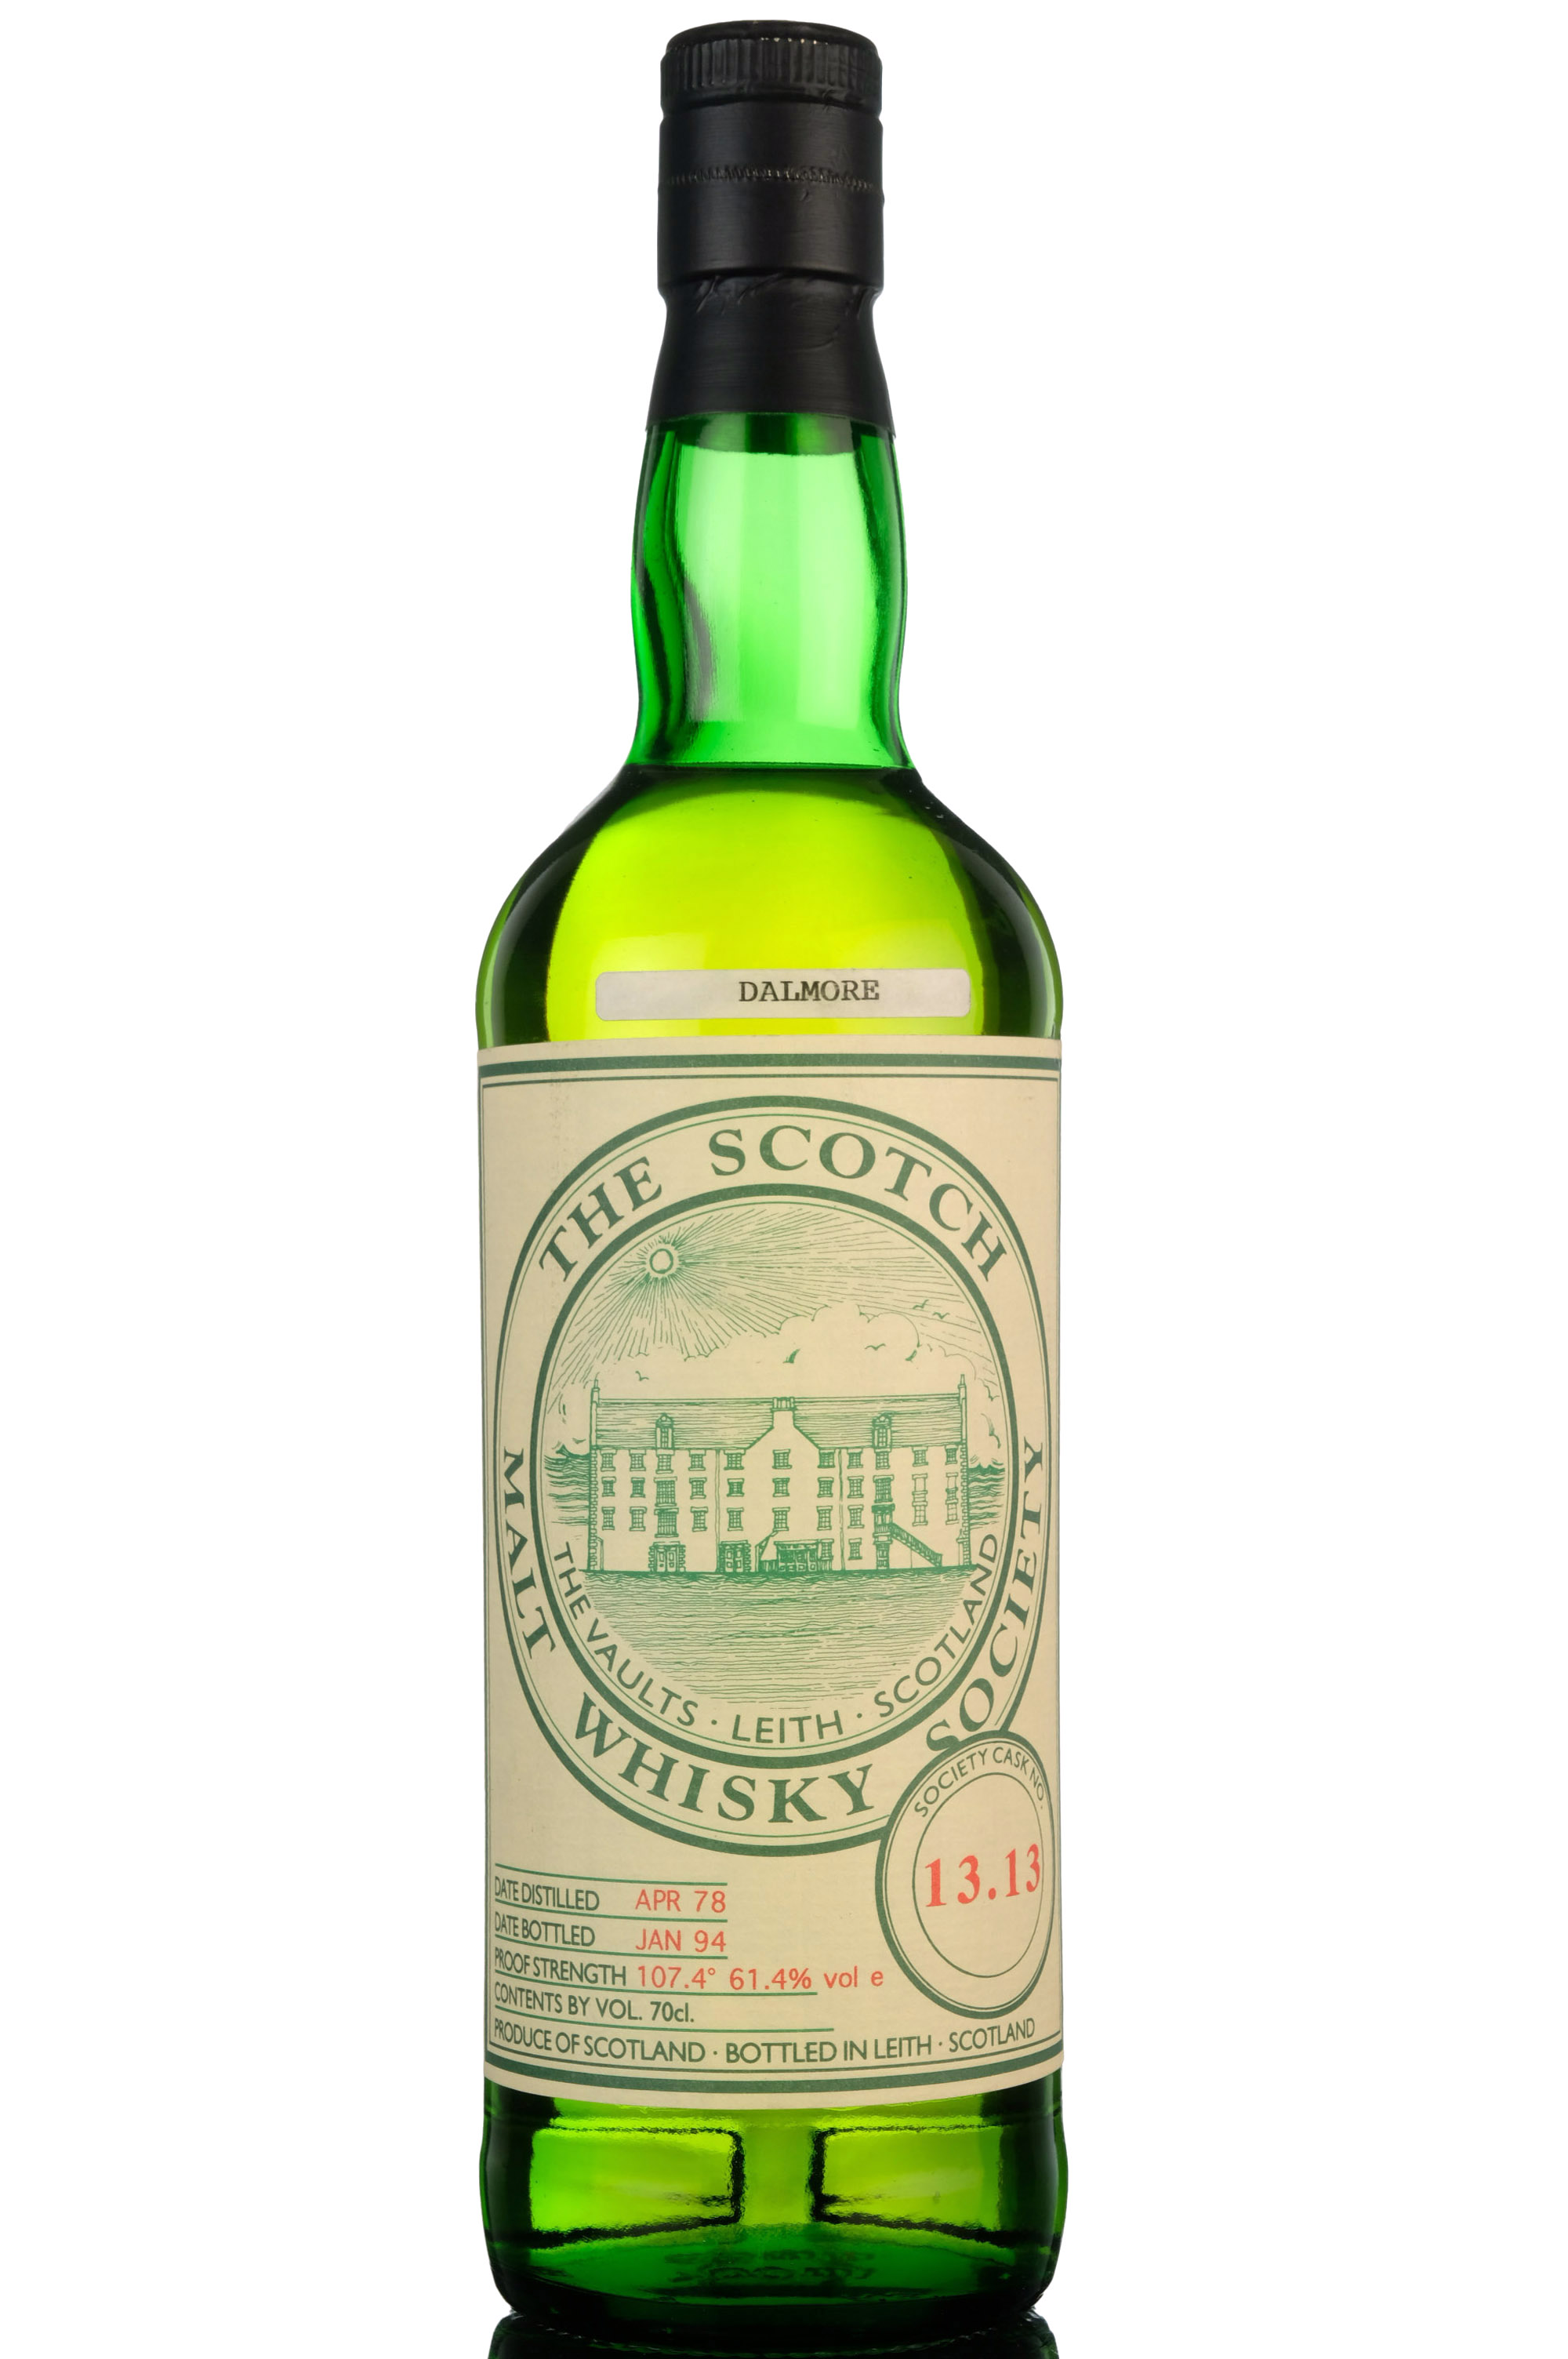 Dalmore 1978-1994 - 15 Year Old - SMWS 13.13